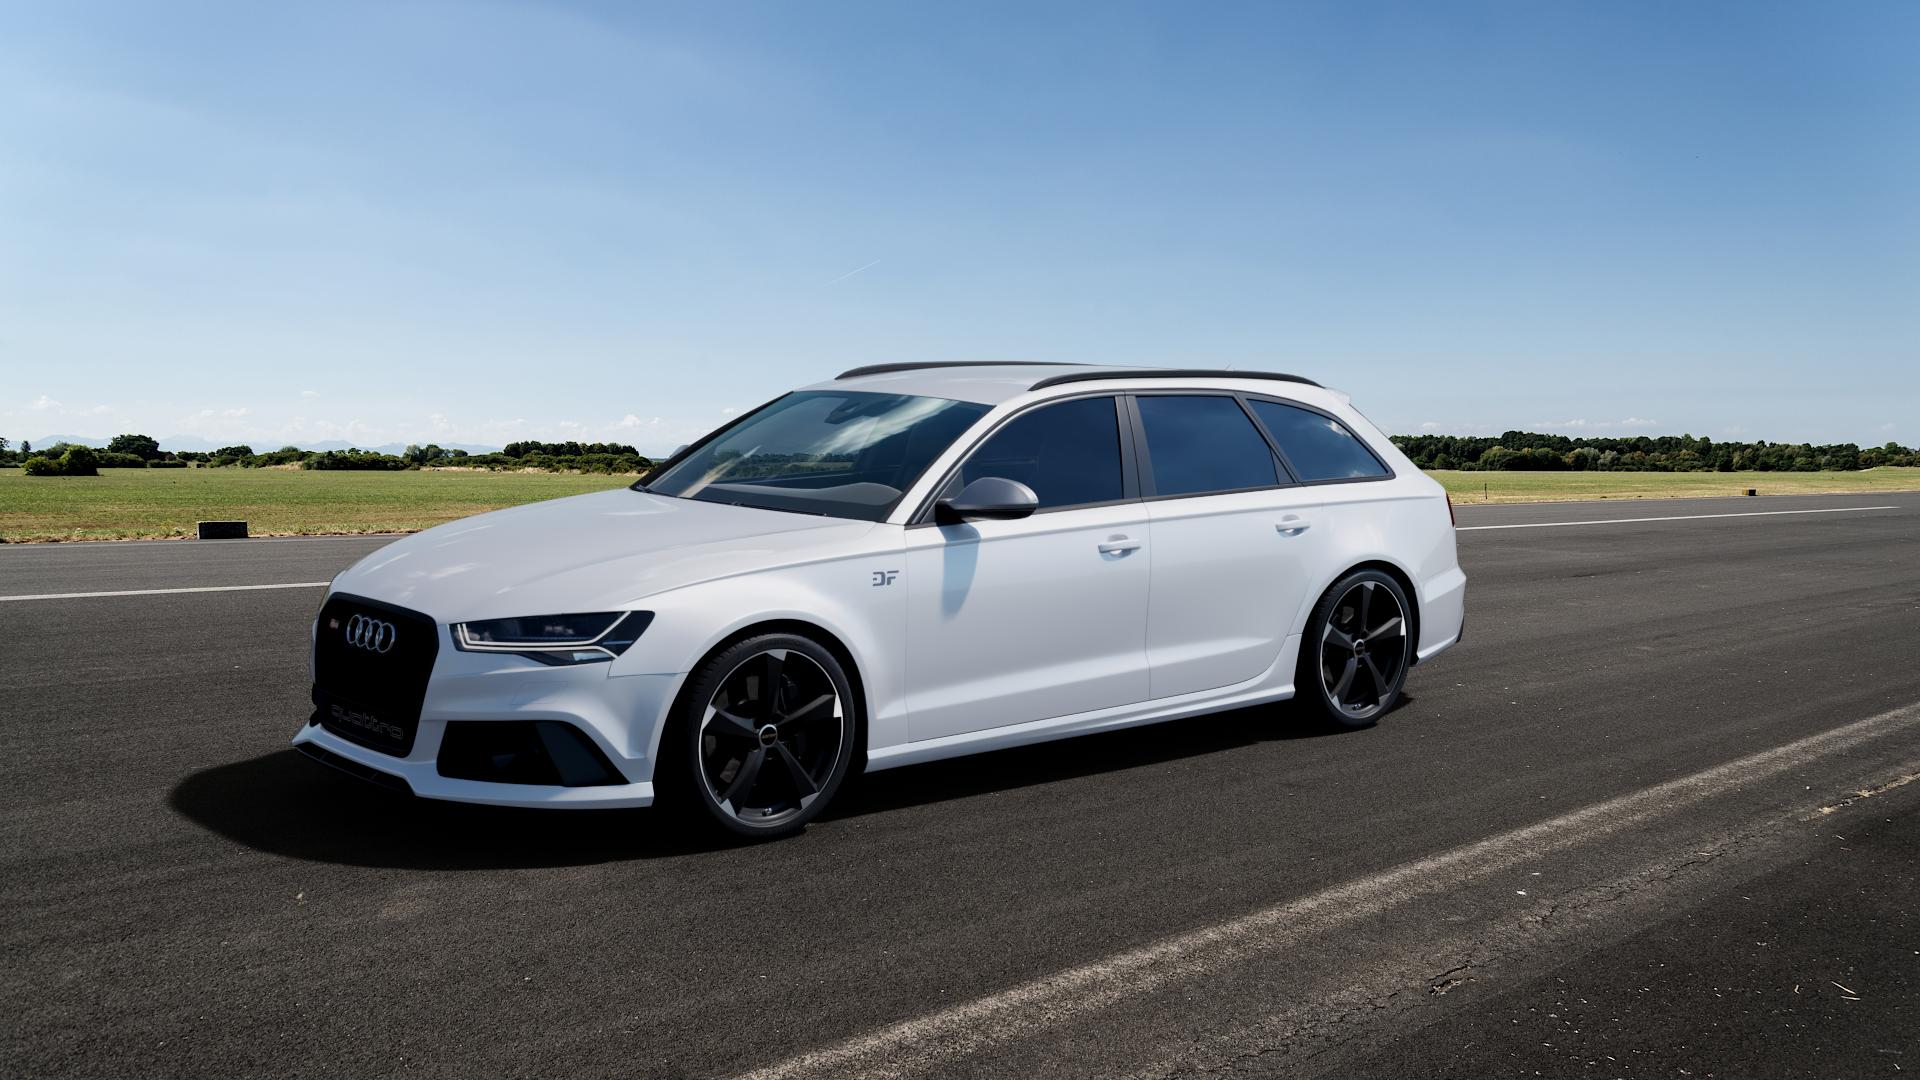 Audi A6 Type 4G/C7 (Avant) Facelift 4,0l RS6 performance TFSI quattro 445kW  (605 hp) Wheels and Tyre Packages | velonity.com